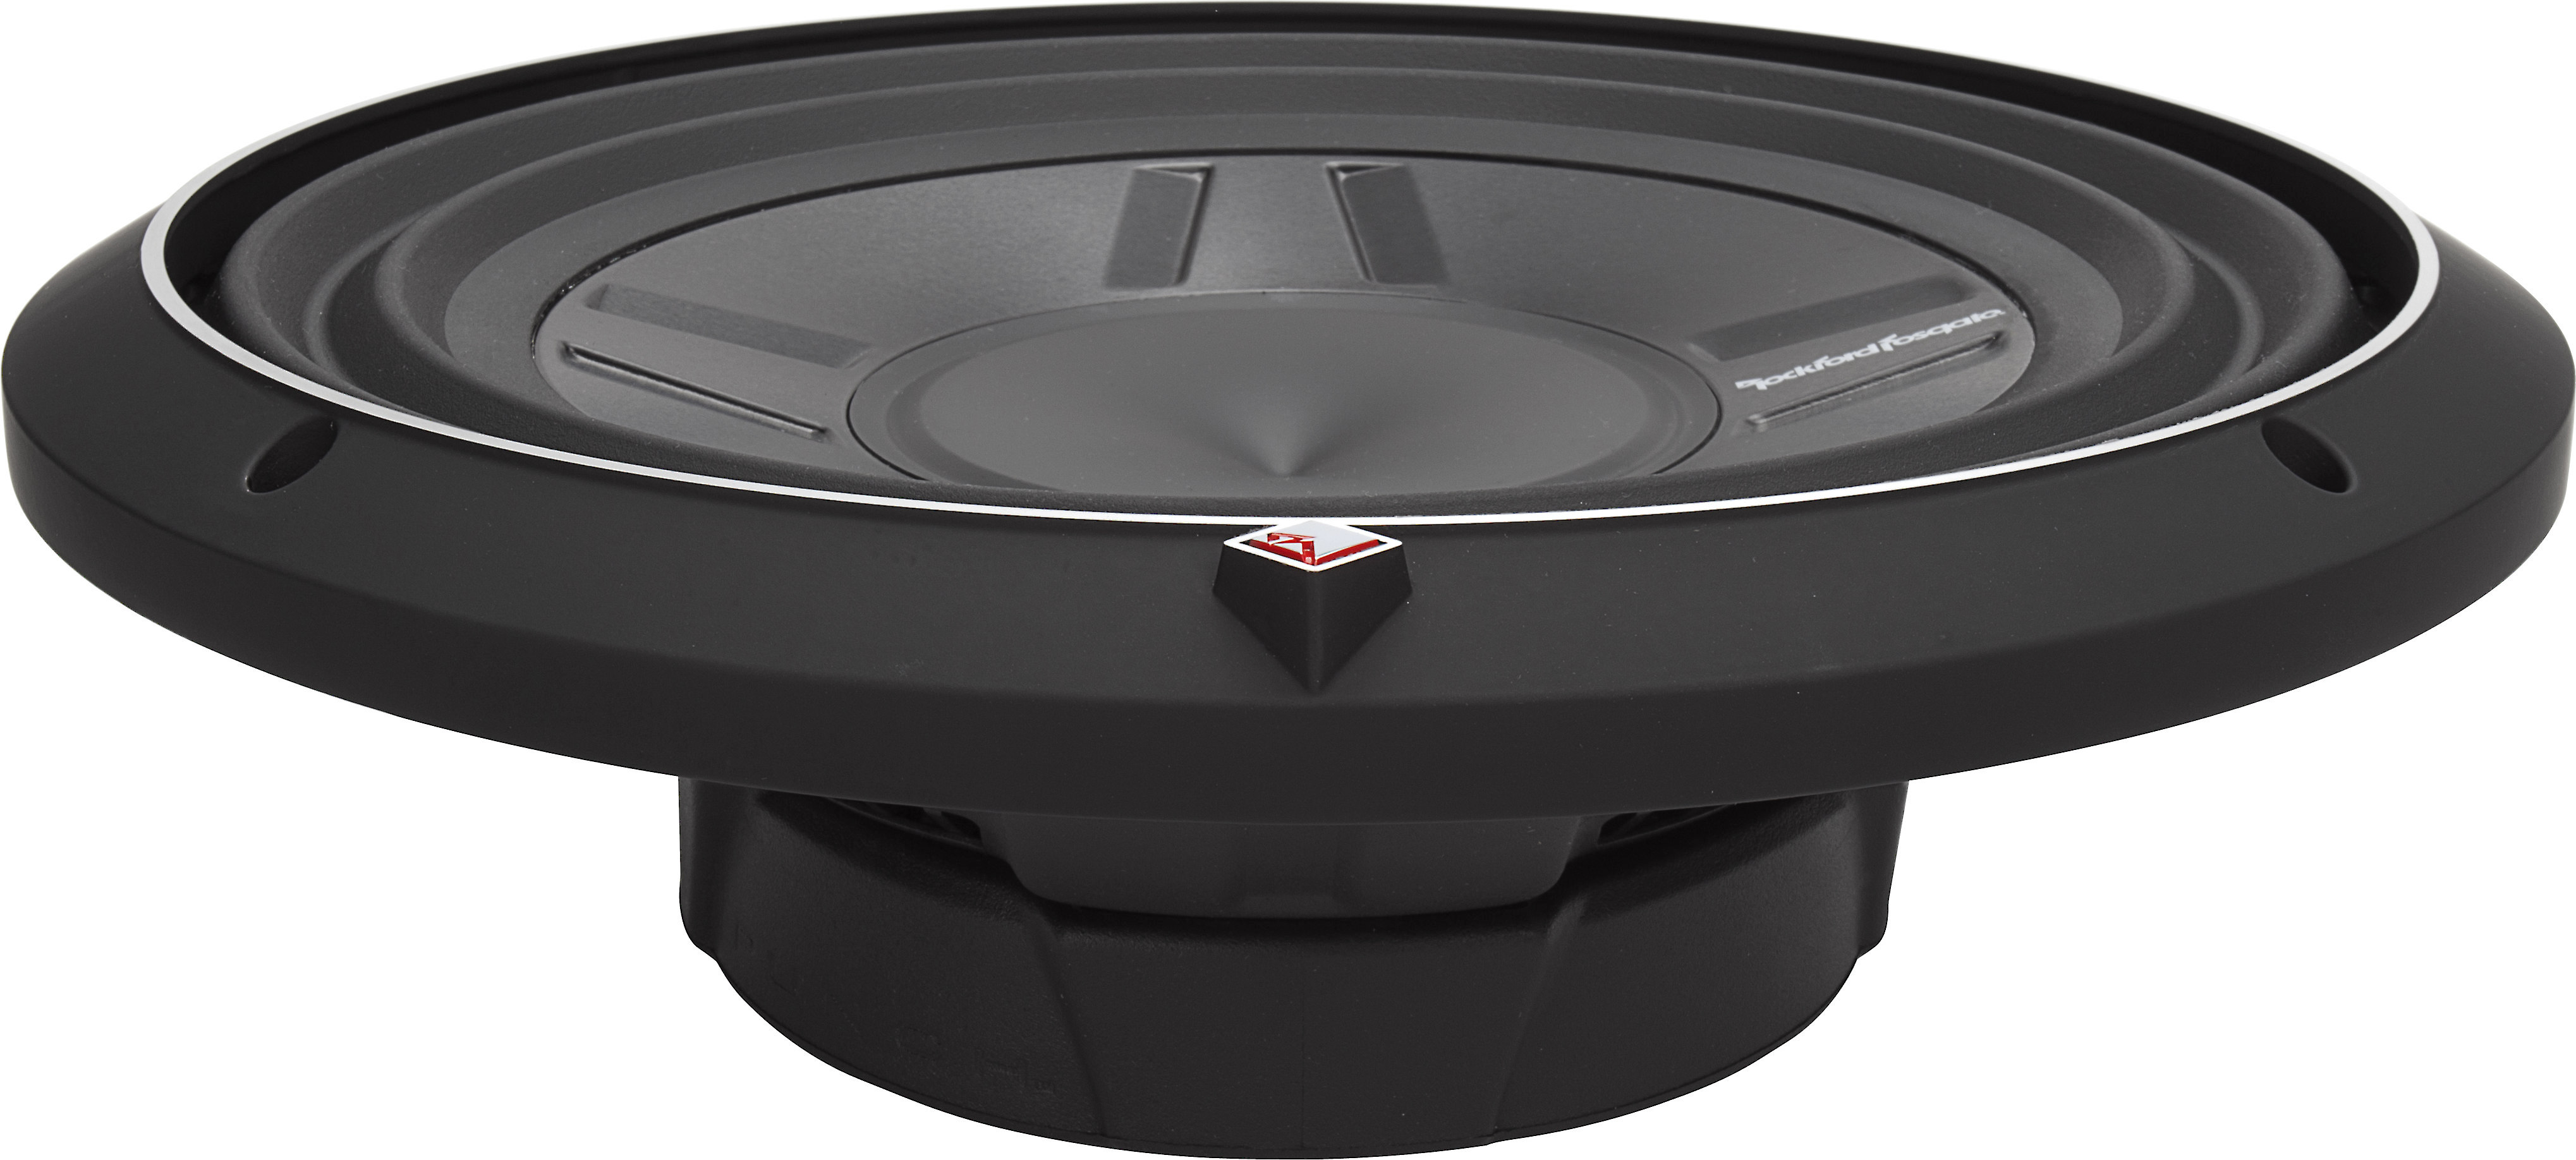 Rockford Fosgate P3SD2-12 Punch Stage 3 